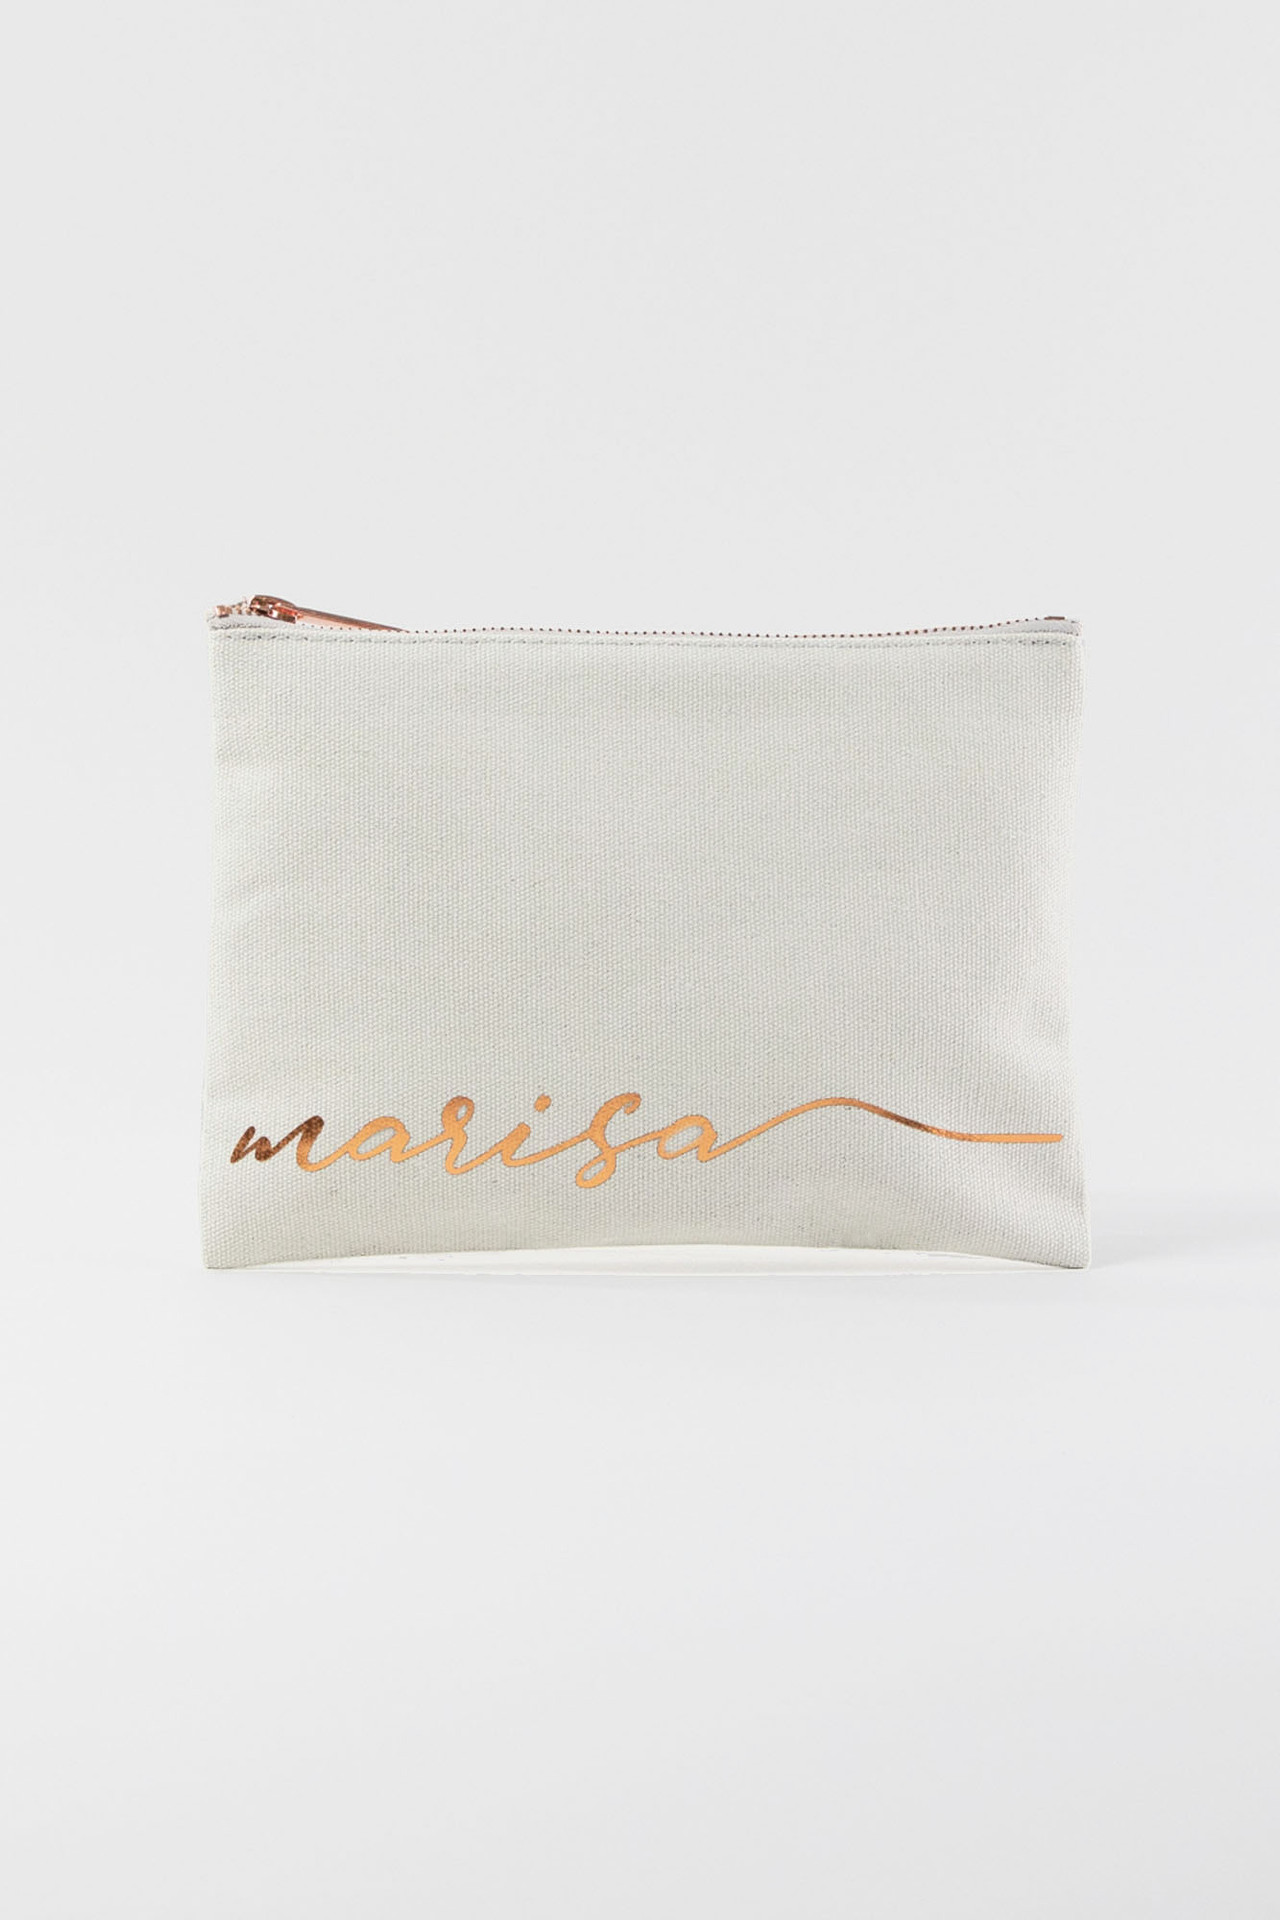 Canvas Makeup Bag Personalized - White